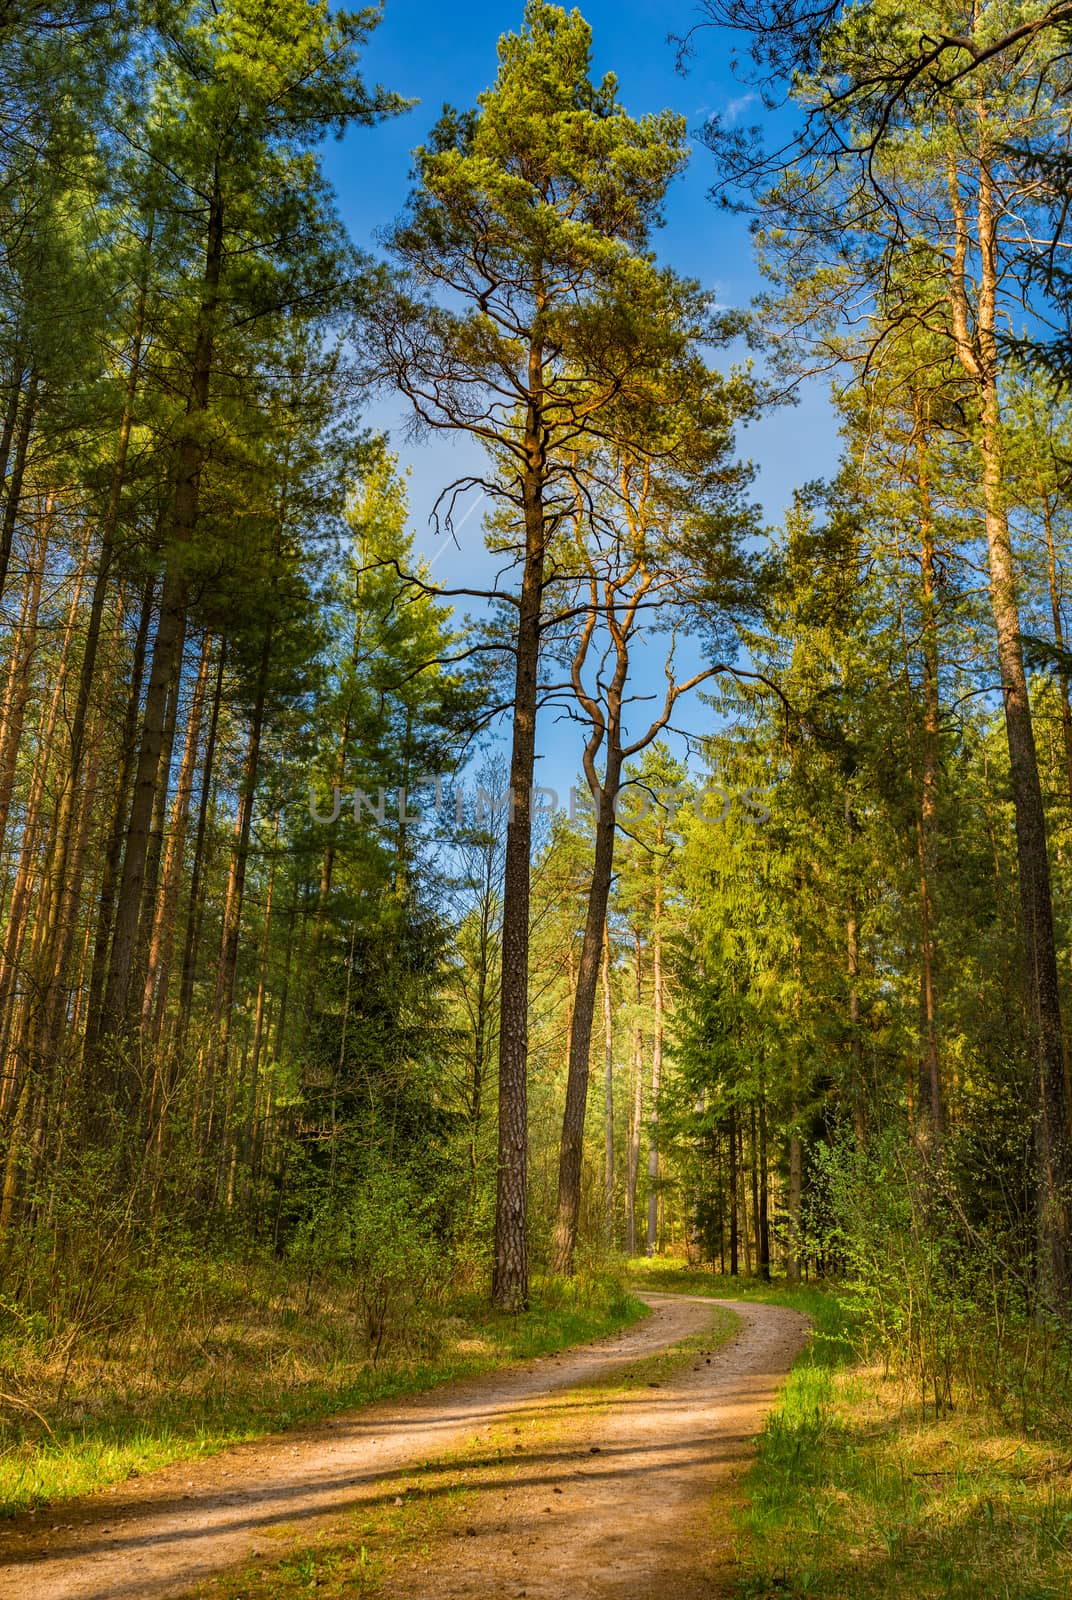 Dirt road in pine tree woodland with sunny blue sky 